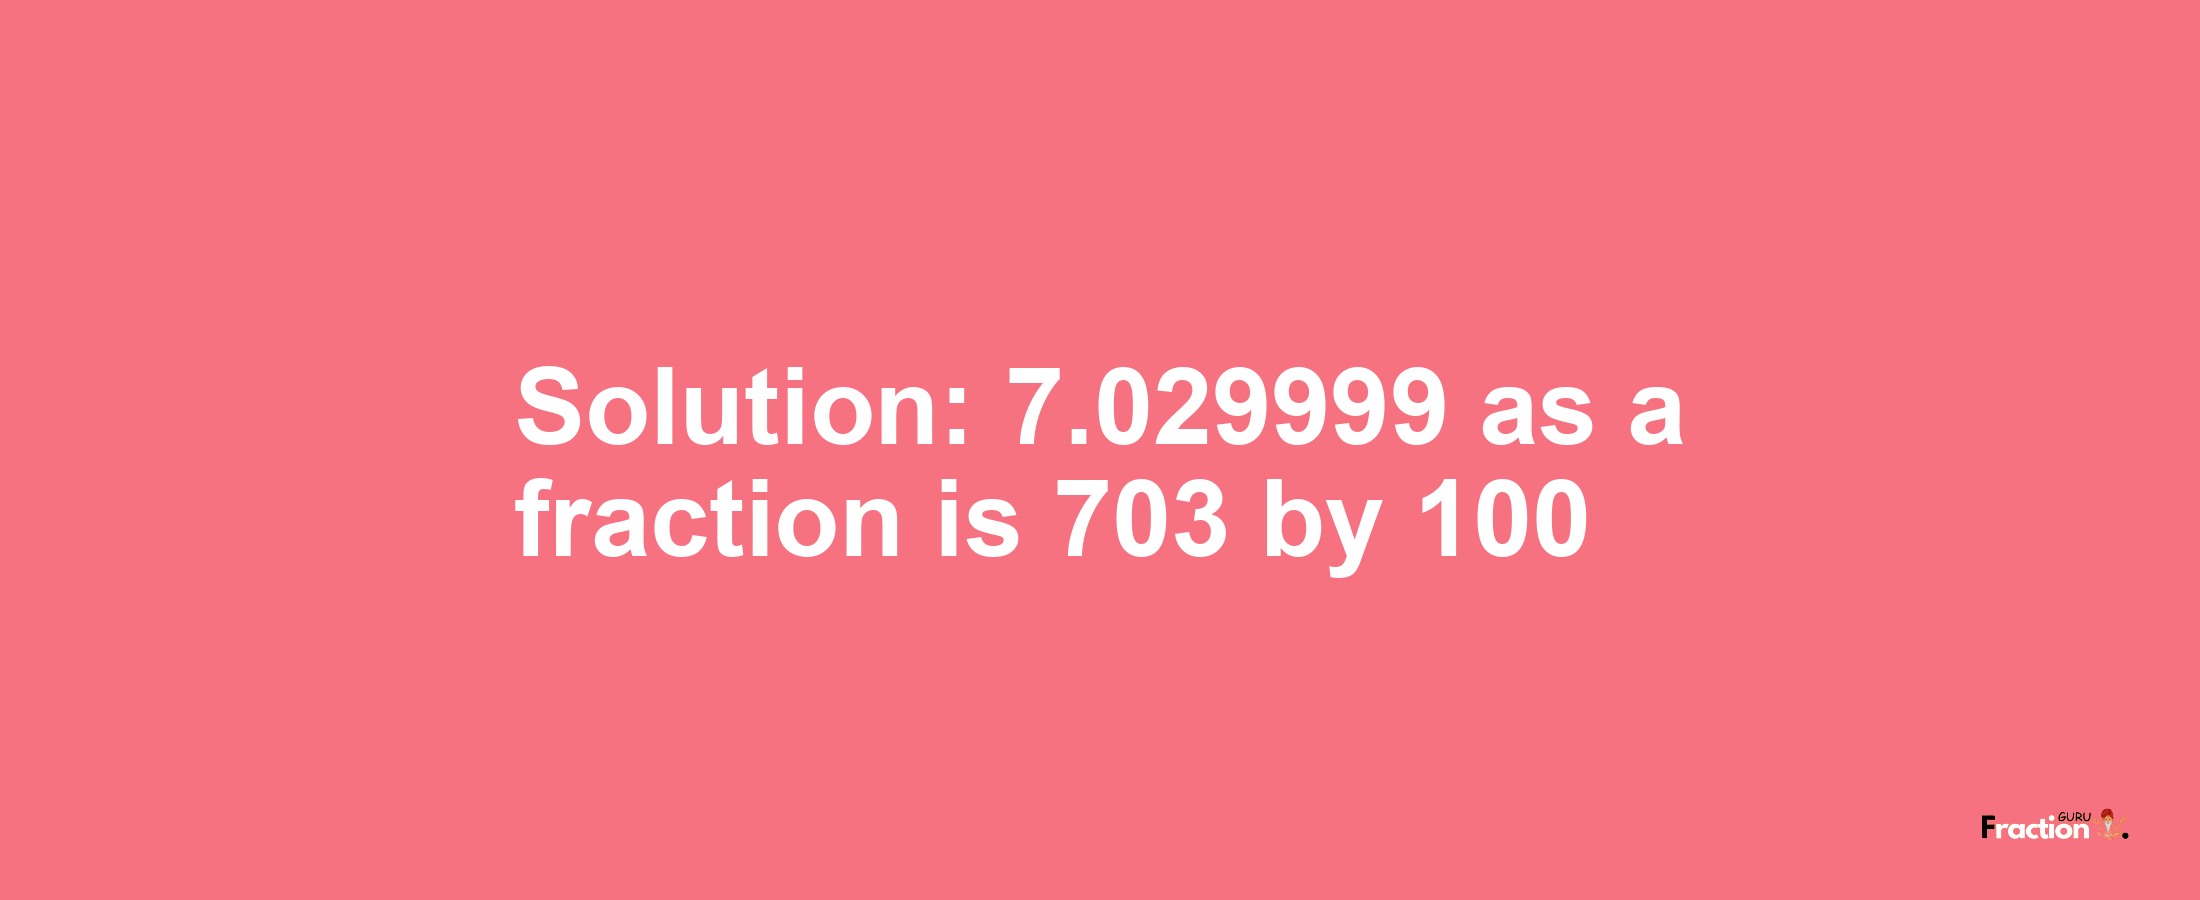 Solution:7.029999 as a fraction is 703/100